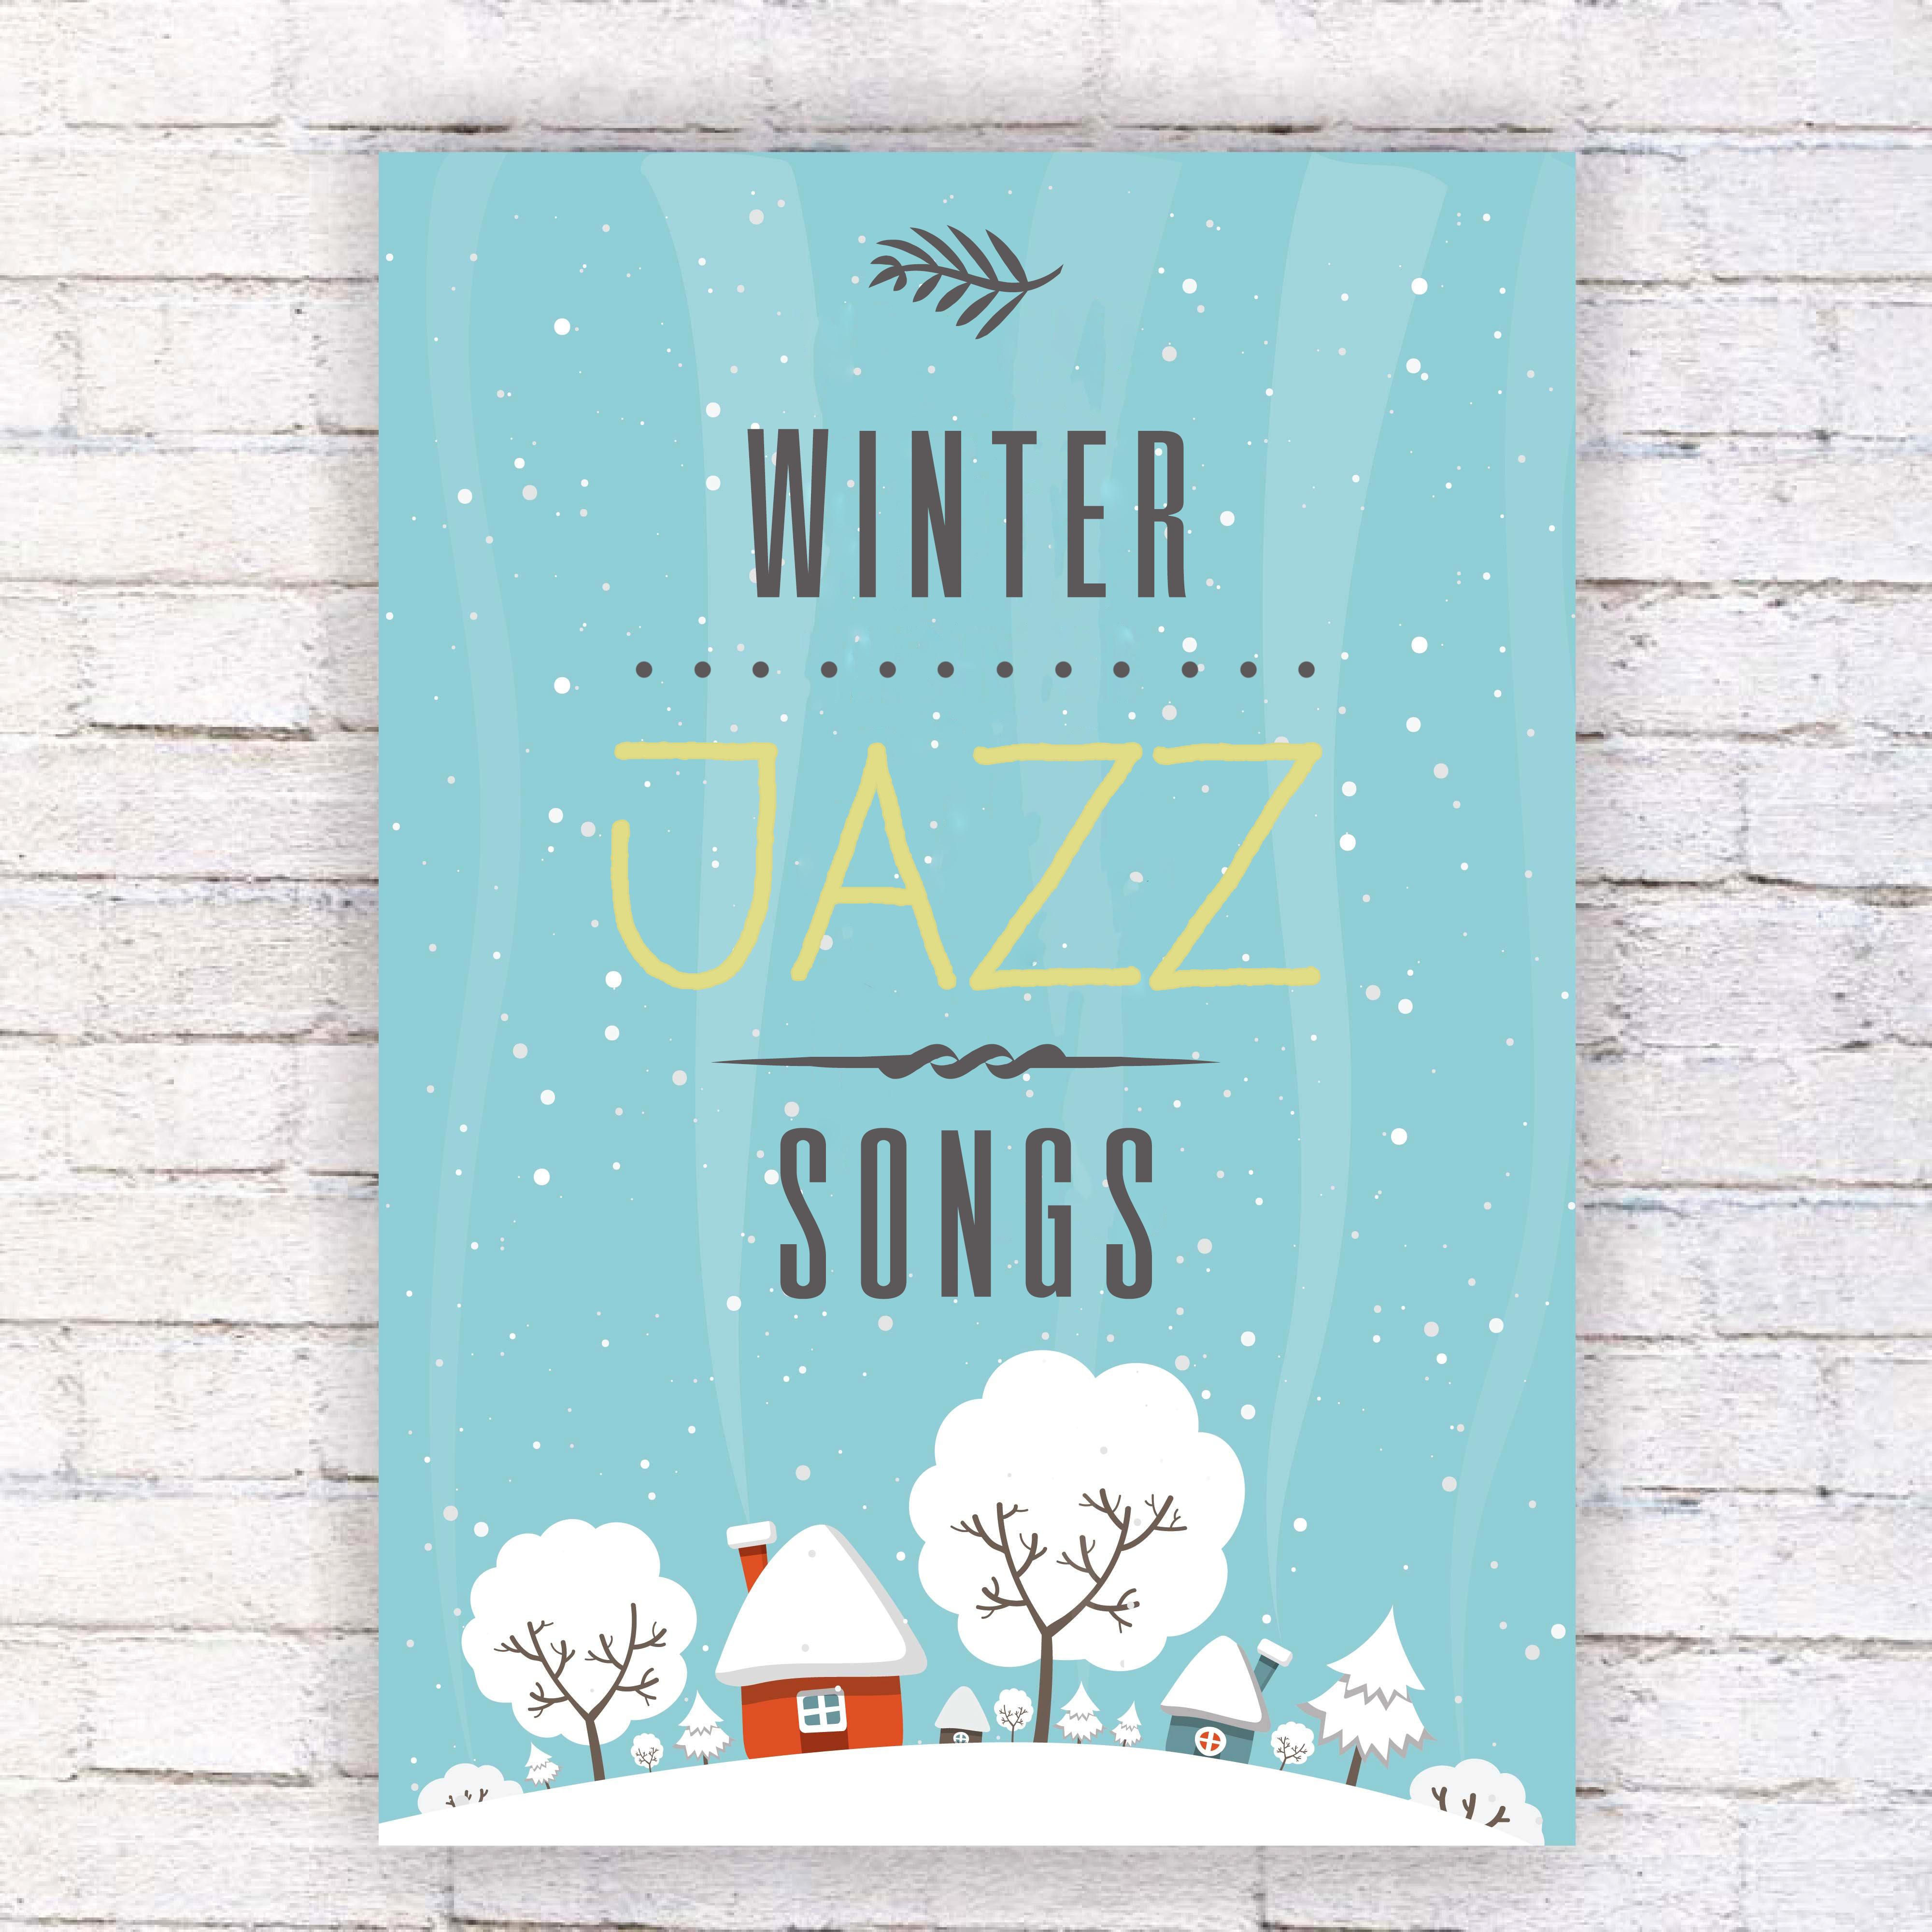 Winter Jazz Songs – Delicate Sounds of Jazz, Instrumental Music, Soft Sounds of Piano, Jazz Lounge